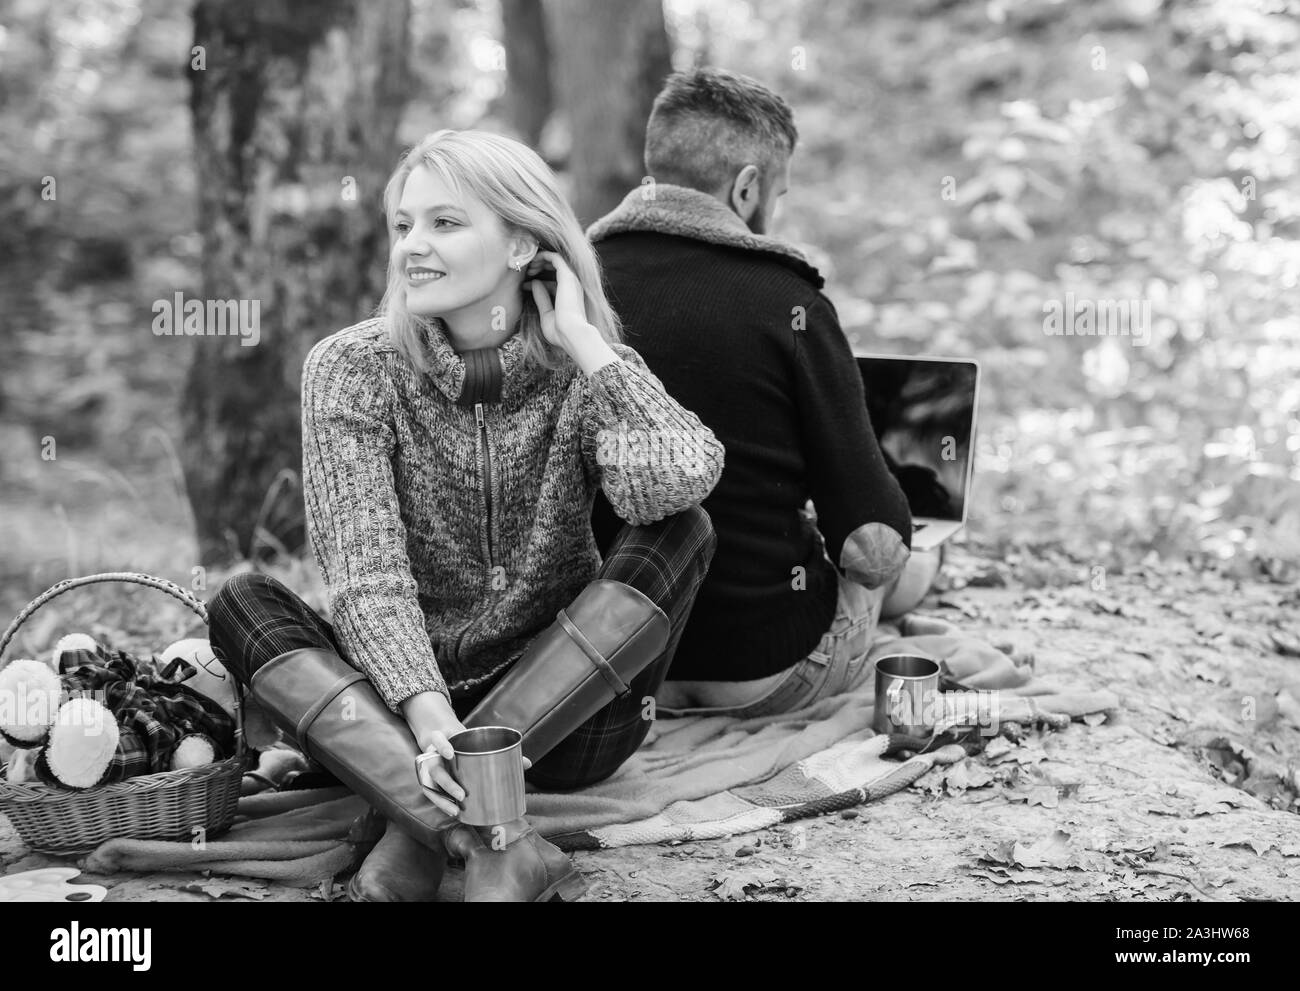 Internet addicted husband. Working on fresh air. Surfing internet. Happy loving couple relaxing in park with laptop. Always at work. Man freelance worker internet addicted gamer with laptop forest. Stock Photo